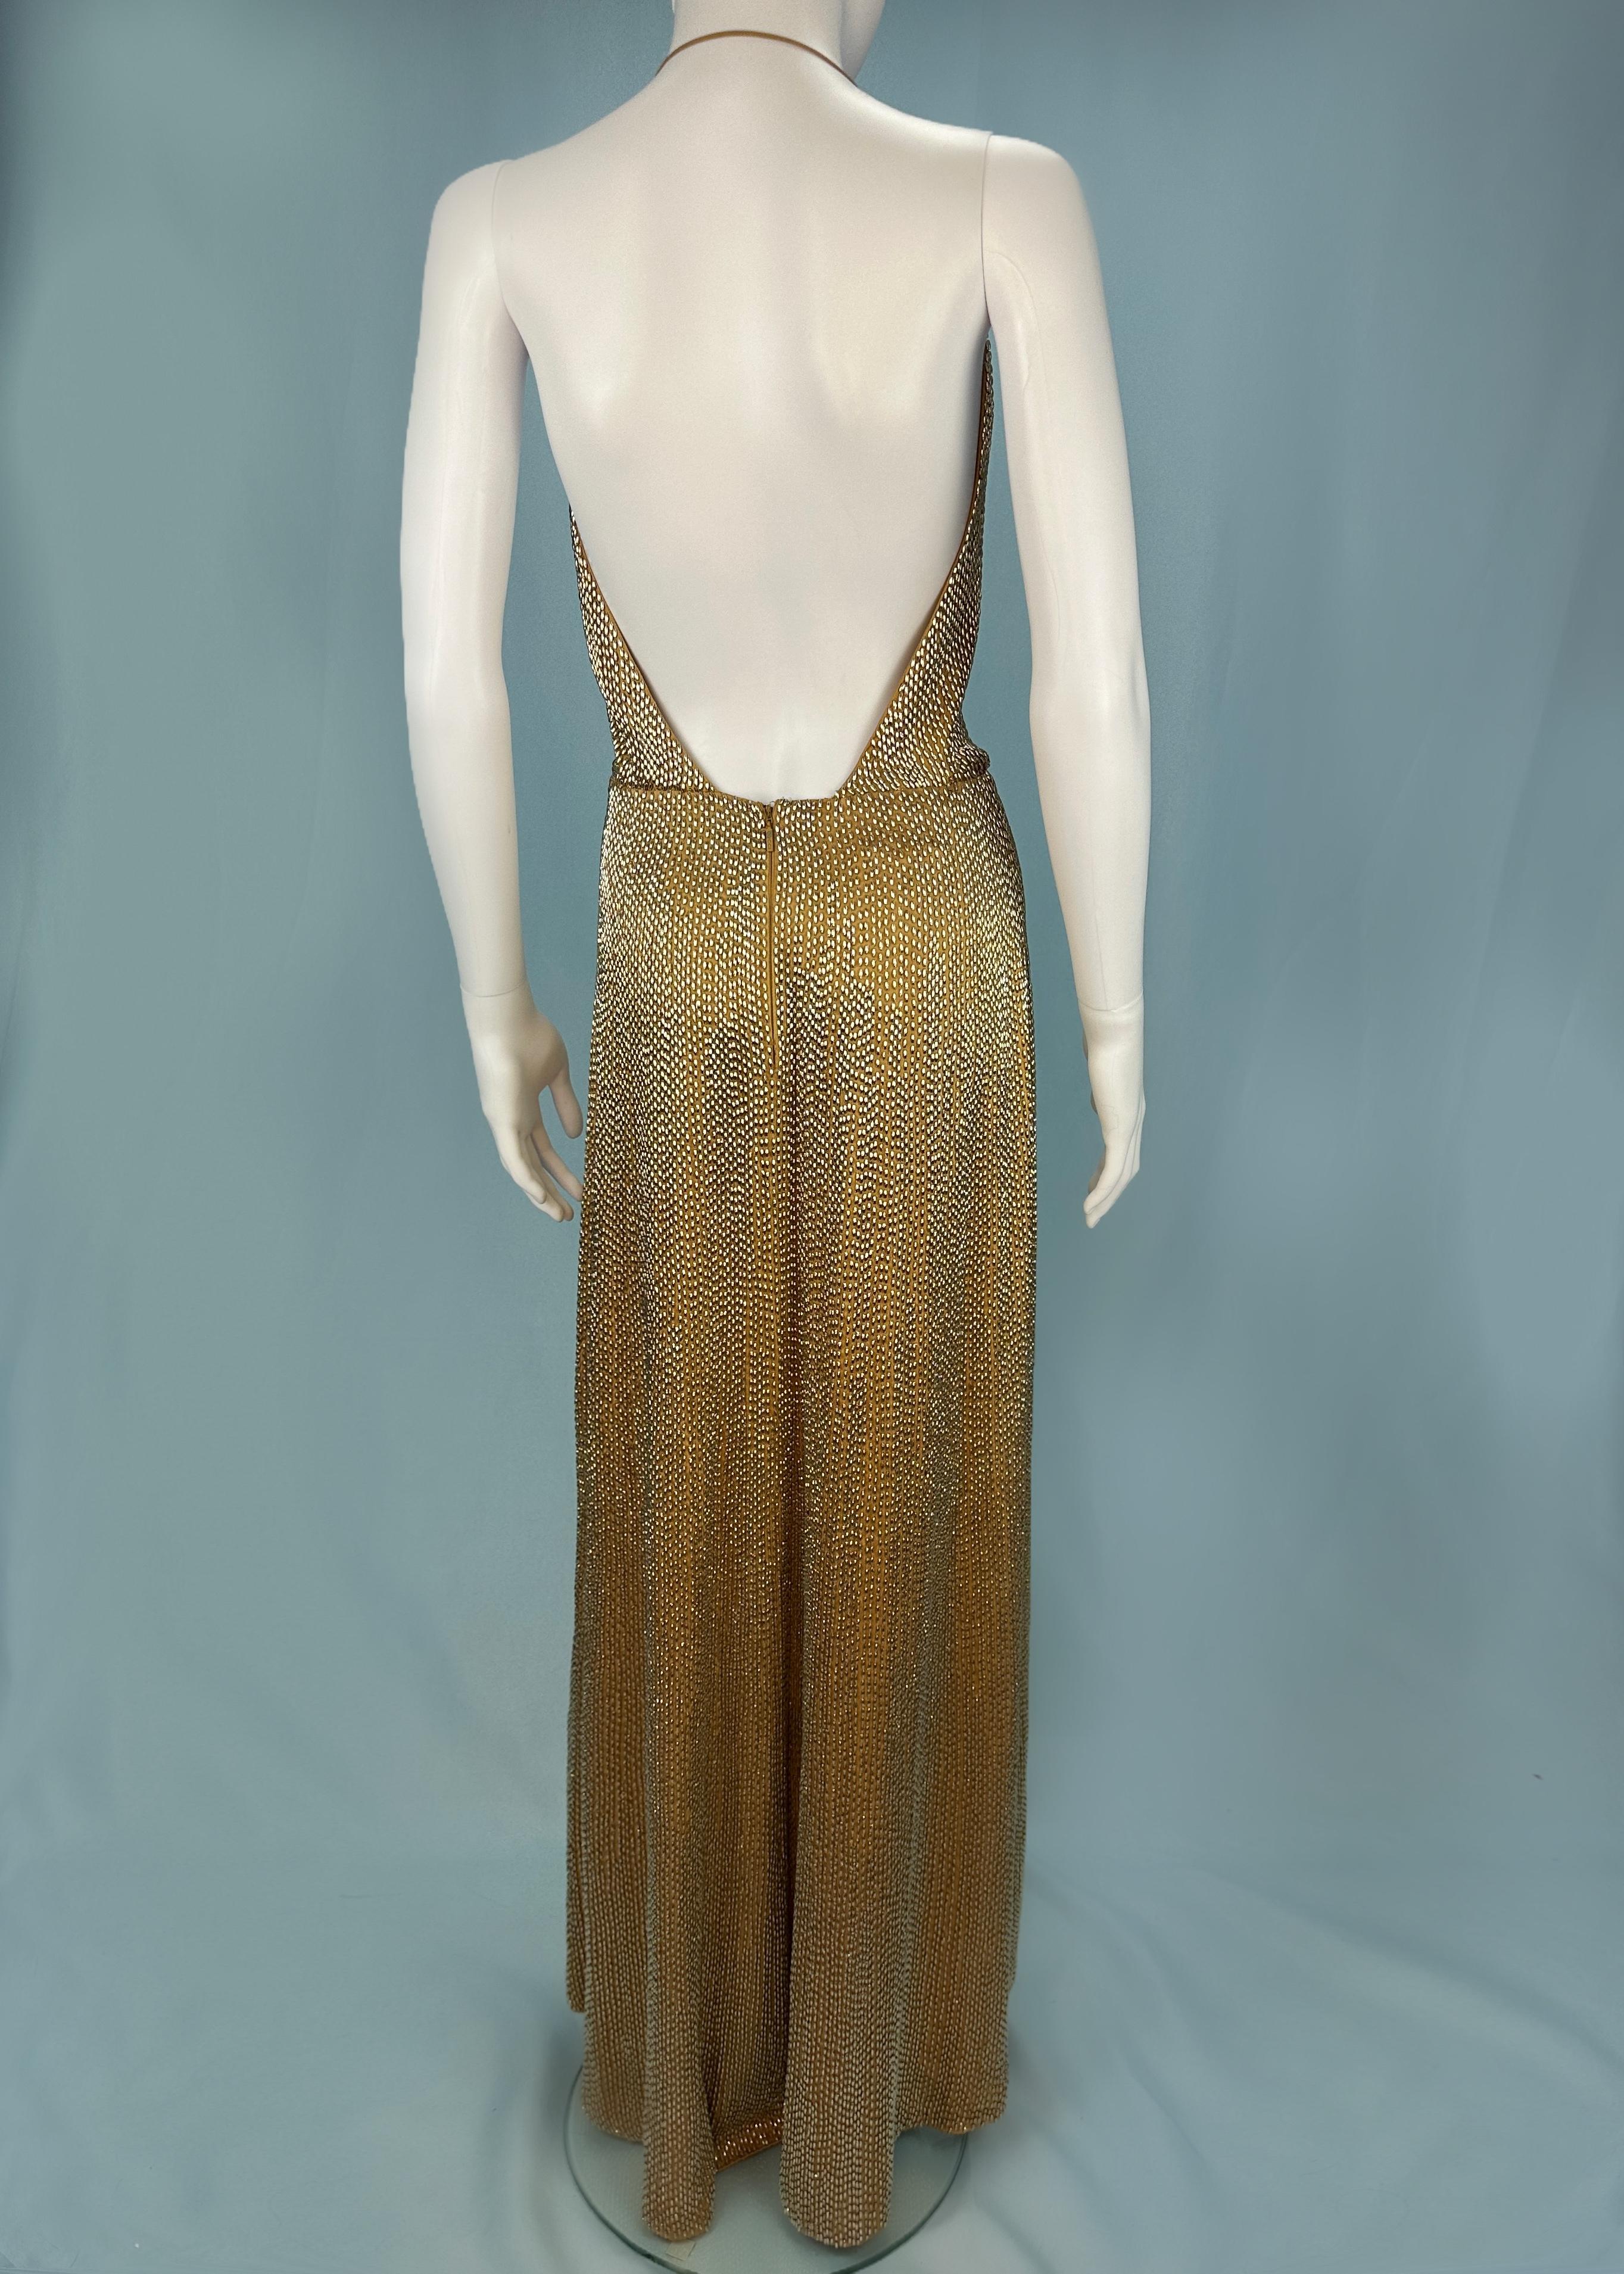 Gucci Fall 2006 Runway Gold Beaded Halter Gown Dress In Good Condition For Sale In Hertfordshire, GB